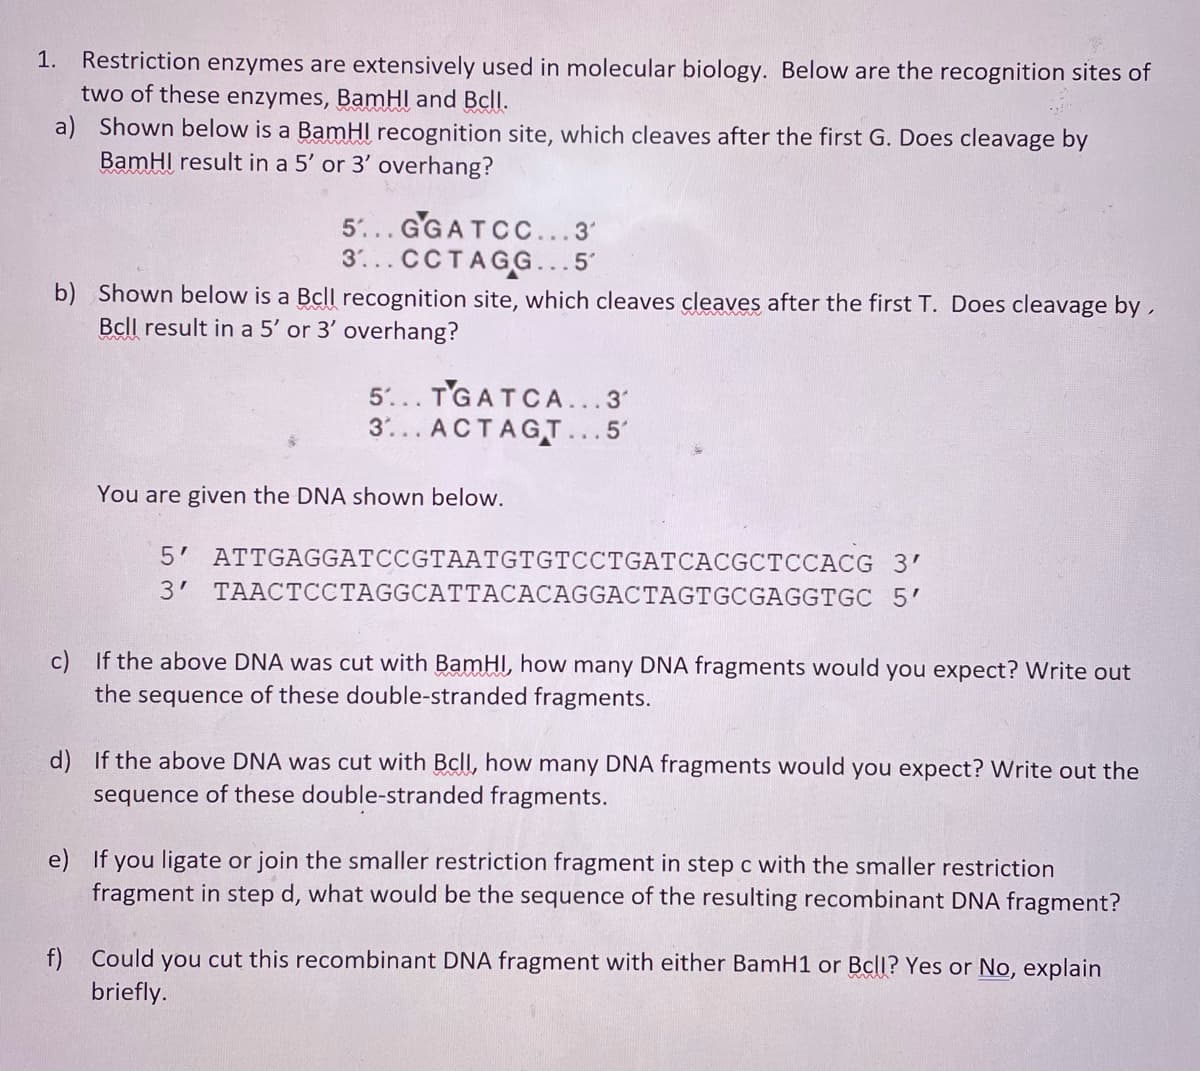 1. Restriction enzymes are extensively used in molecular biology. Below are the recognition sites of
two of these enzymes, BamHI and Bcll.
a) Shown below is a BamHI recognition site, which cleaves after the first G. Does cleavage by
BamHI result in a 5' or 3' overhang?
5... GGATCC...3'
3...CCTAGG...5'
b) Shown below is a Bcll recognition site, which cleaves cleaves after the first T. Does cleavage by ,
Bcll result in a 5' or 3' overhang?
5... TGATCA...3'
3'... ACTAGT.. 5'
You are given the DNA shown below.
5 ATTGAGGATCCGTAATGTGTCCTGATCACGCTCCACG 3'
3' TAACTCCTAGGCATTACACAGGACTAGTGCGAGGTGC 5'
c) If the above DNA was cut with BamHI, how many DNA fragments would you expect? Write out
the sequence of these double-stranded fragments.
d) If the above DNA was cut with Bcll, how many DNA fragments would you expect? Write out the
sequence of these double-stranded fragments.
e) If you ligate or join the smaller restriction fragment in step c with the smaller restriction
fragment in step d, what would be the sequence of the resulting recombinant DNA fragment?
f) Could you cut this recombinant DNA fragment with either BamH1 or Bcll? Yes or No, explain
briefly.
